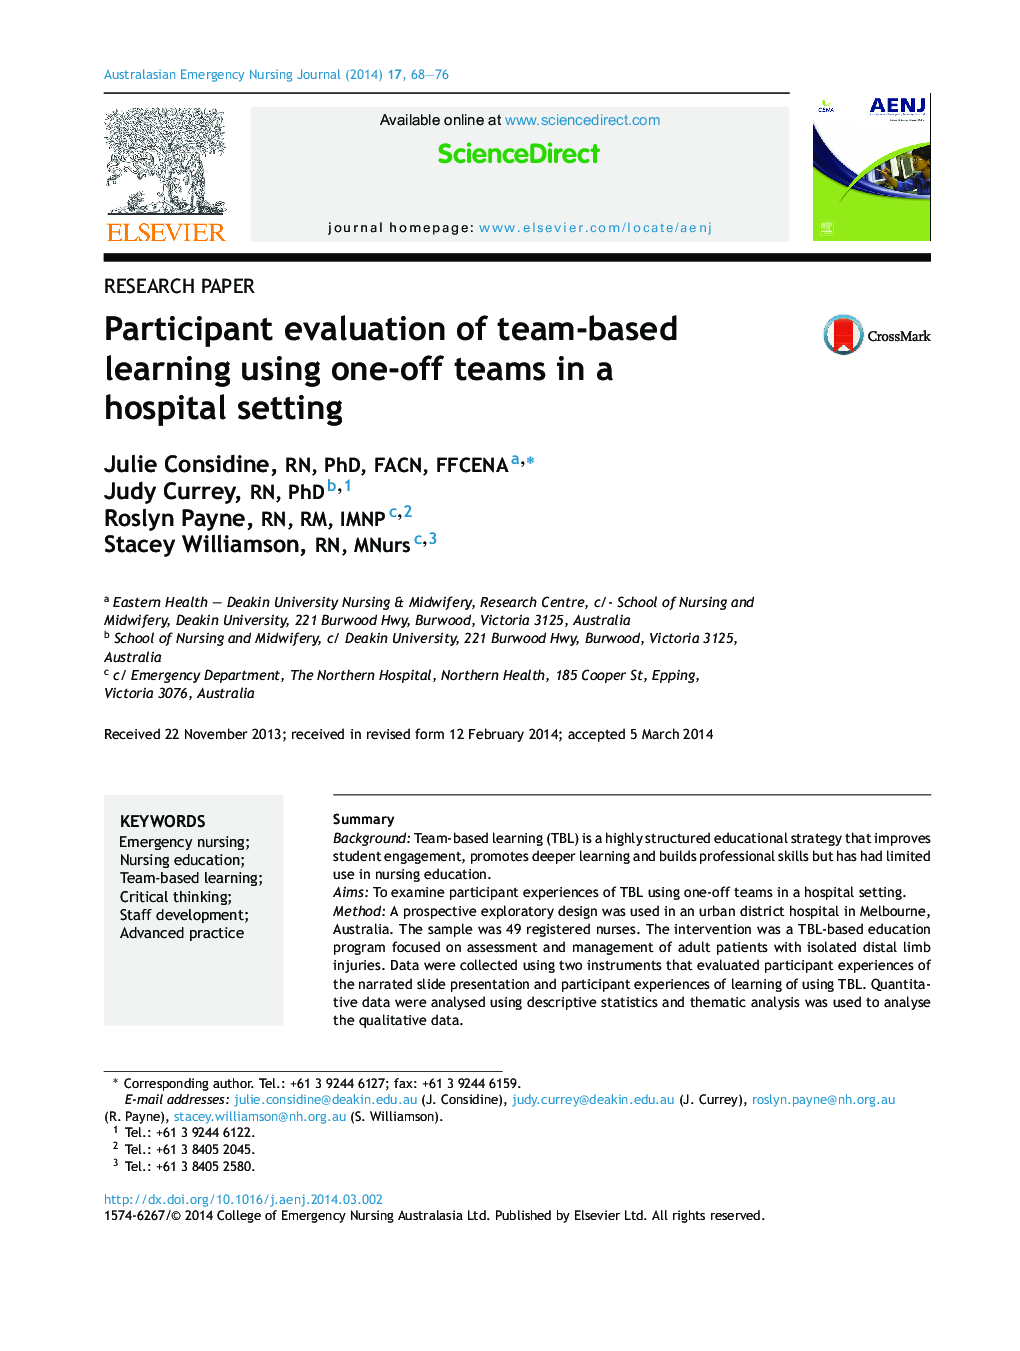 Participant evaluation of team-based learning using one-off teams in a hospital setting